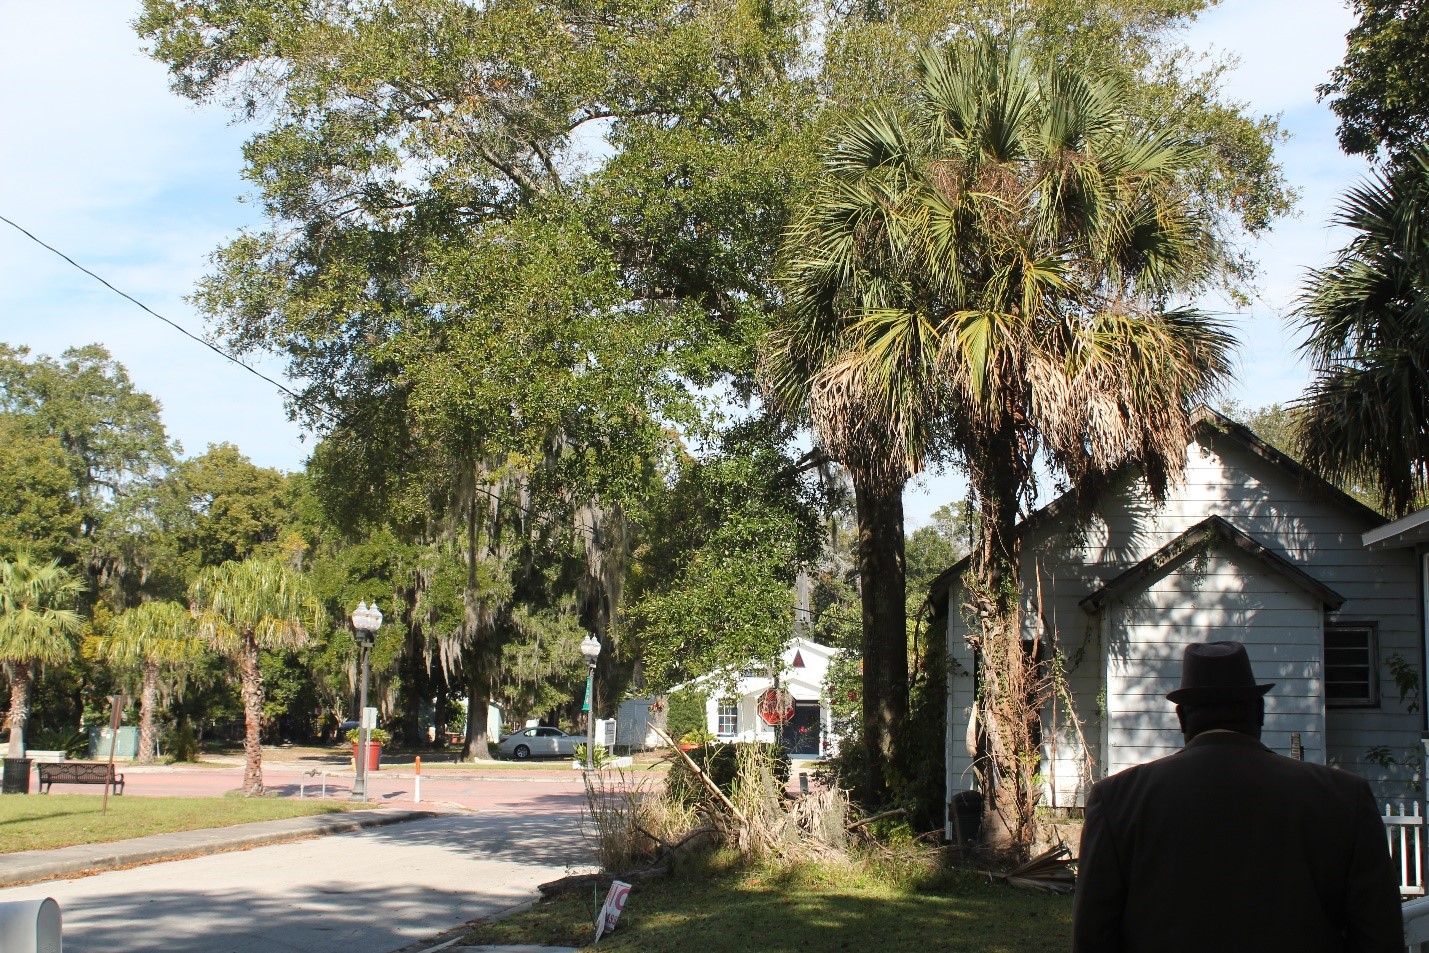 Mayor Mount walking on a street lined with palm trees and street lamps, with a park bench on one side